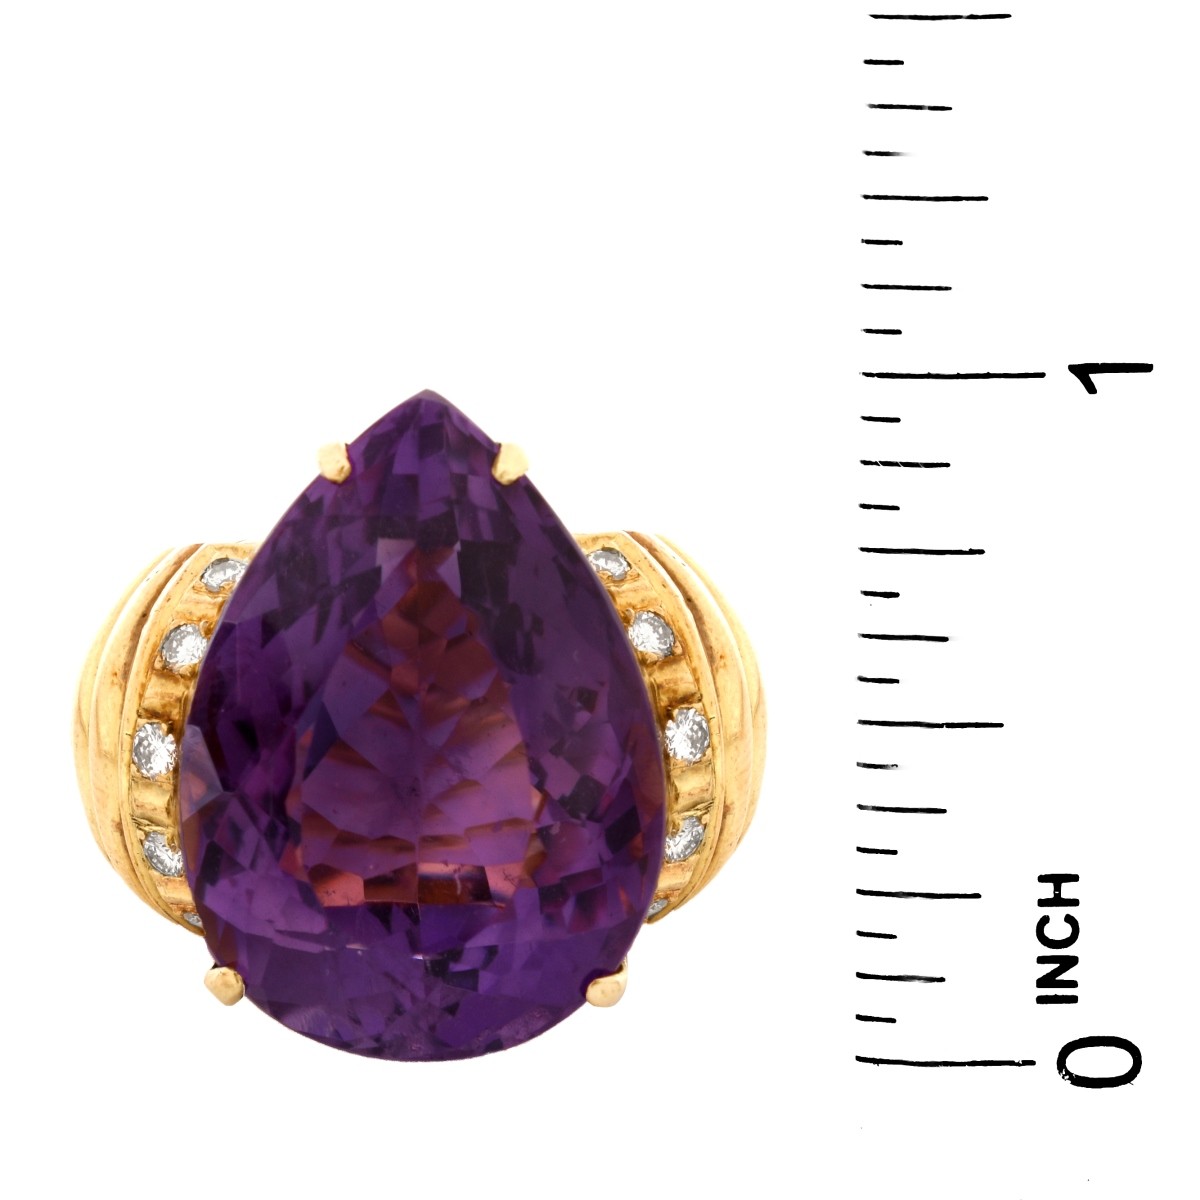 Vintage Amethyst, Diamond and 14K Ring - Image 5 of 5